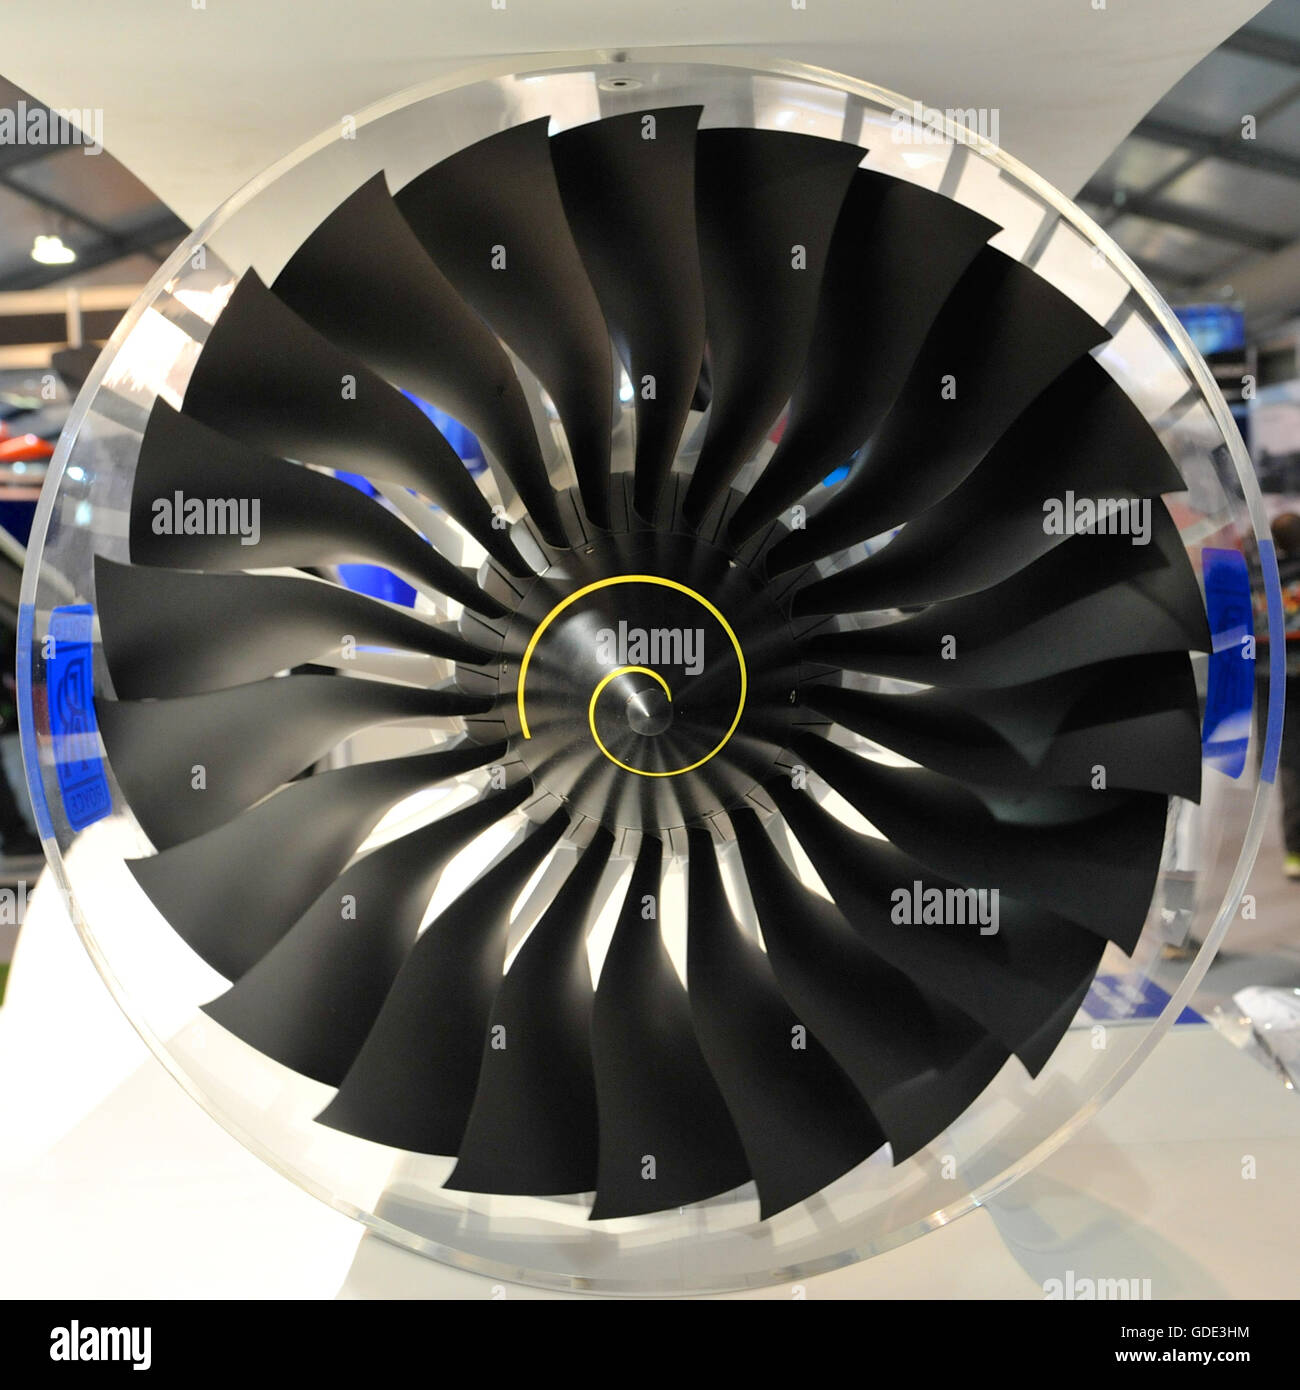 Farnborough, UK. 15th July, 2016. A model of a jet engine air intake assembly on display in the trade pavilions at the Farnborough International Airshow (FIA) which took place today in Farnborough, UK.  The air show, a biannual showcase for the aviation industry, is the biggest of it's kind and attracts civil and military buyers from all over the world. trade visitors are normally in excess of 100,000 people. The show runs until July 17. Credit:  Michael Preston/Alamy Live News Stock Photo